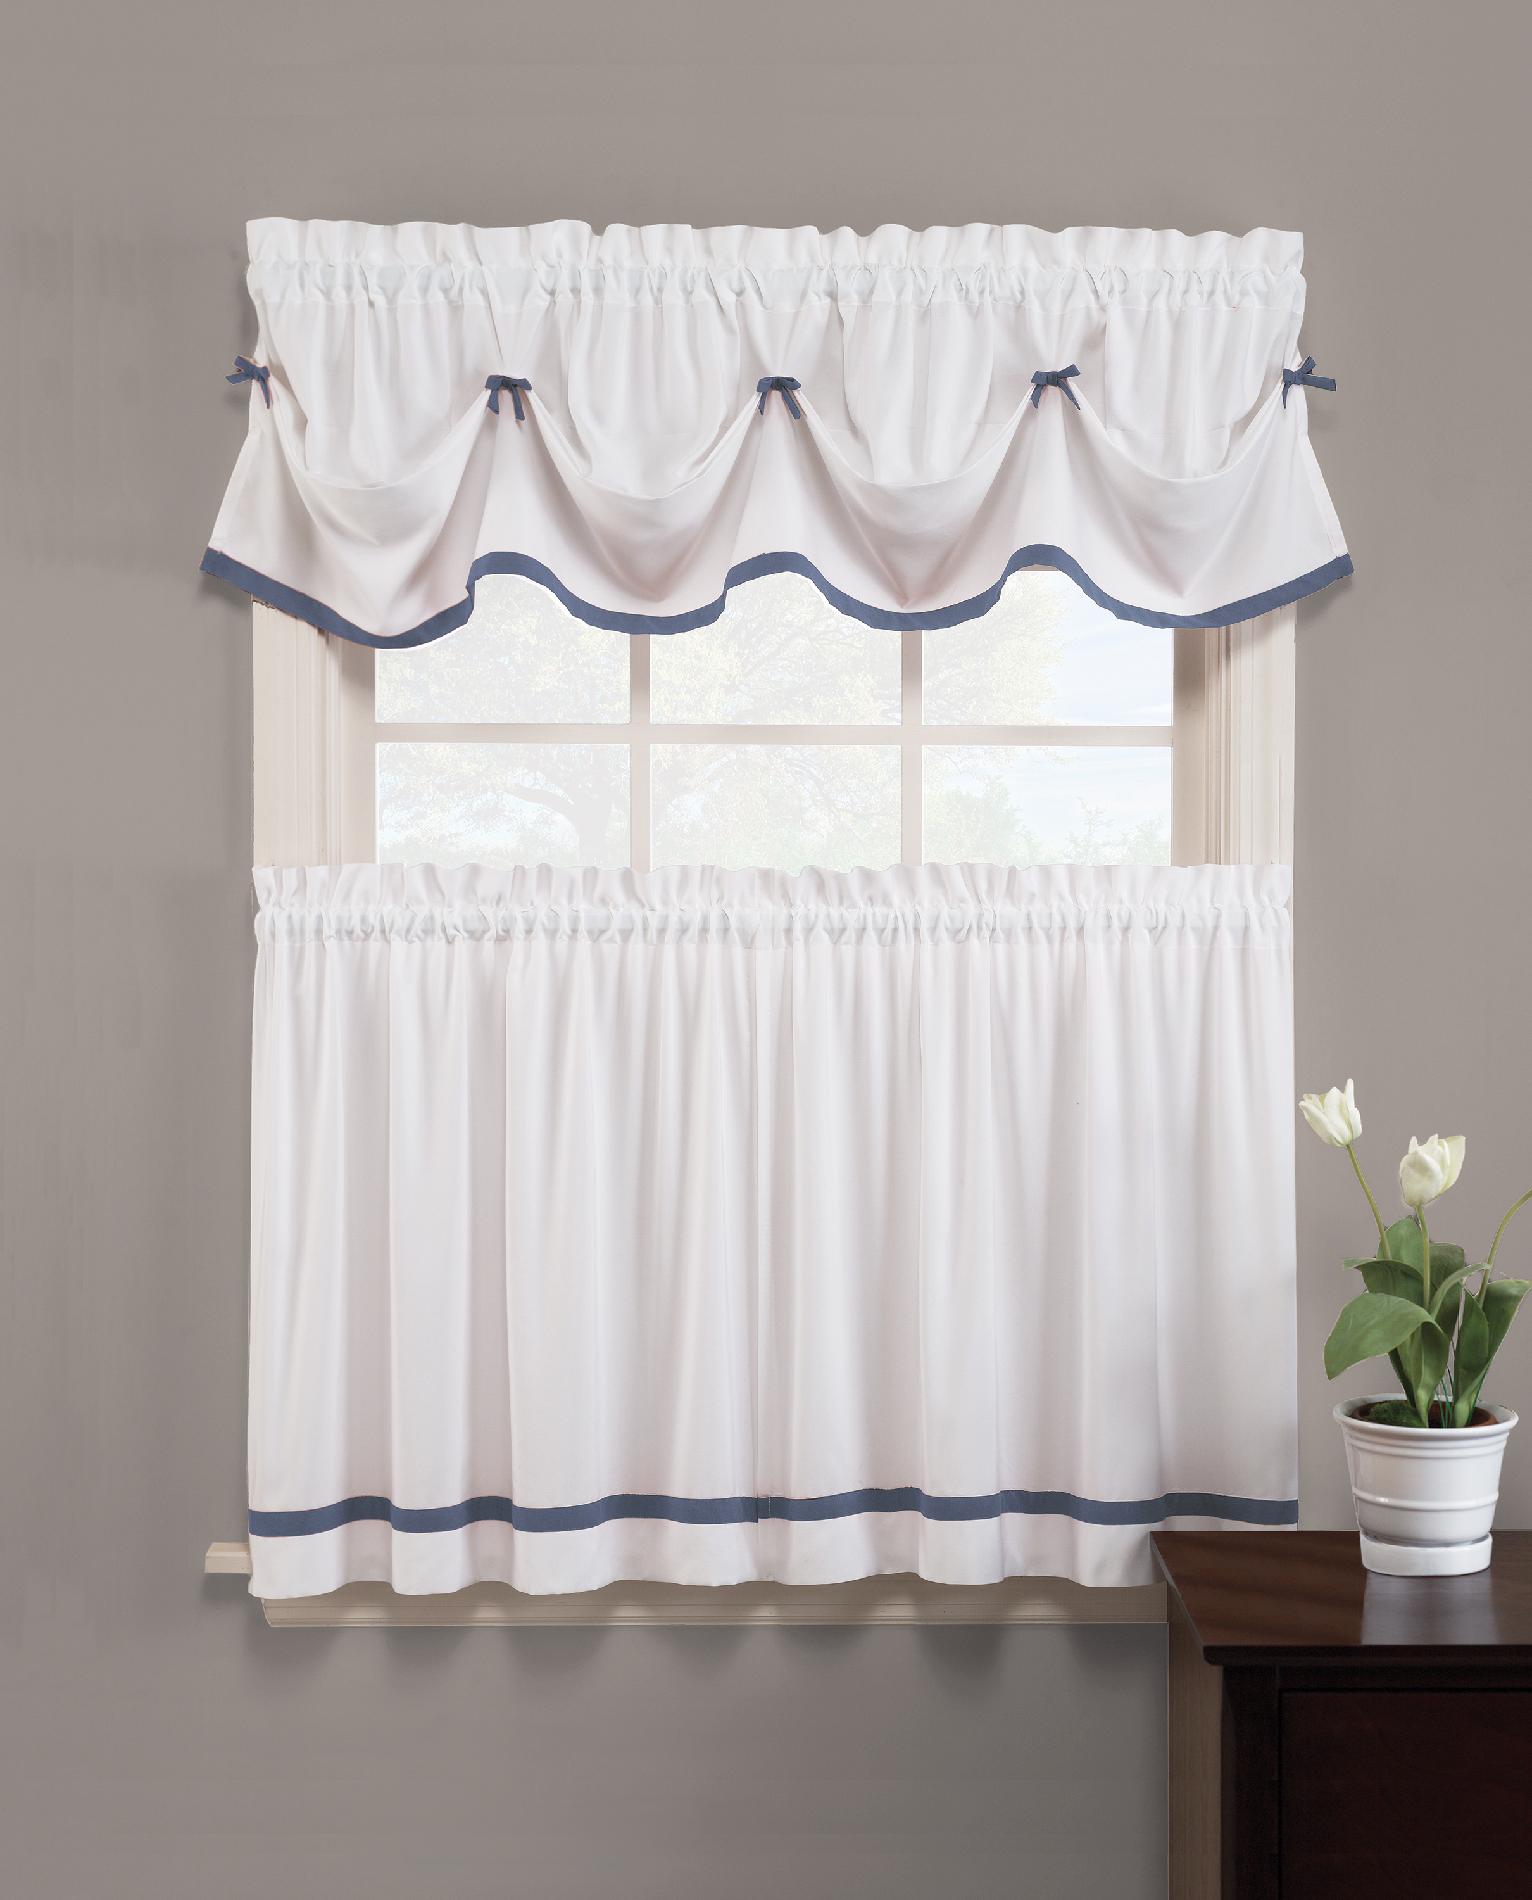 Long Sheer Curtain Panels Window Curtains and Valances